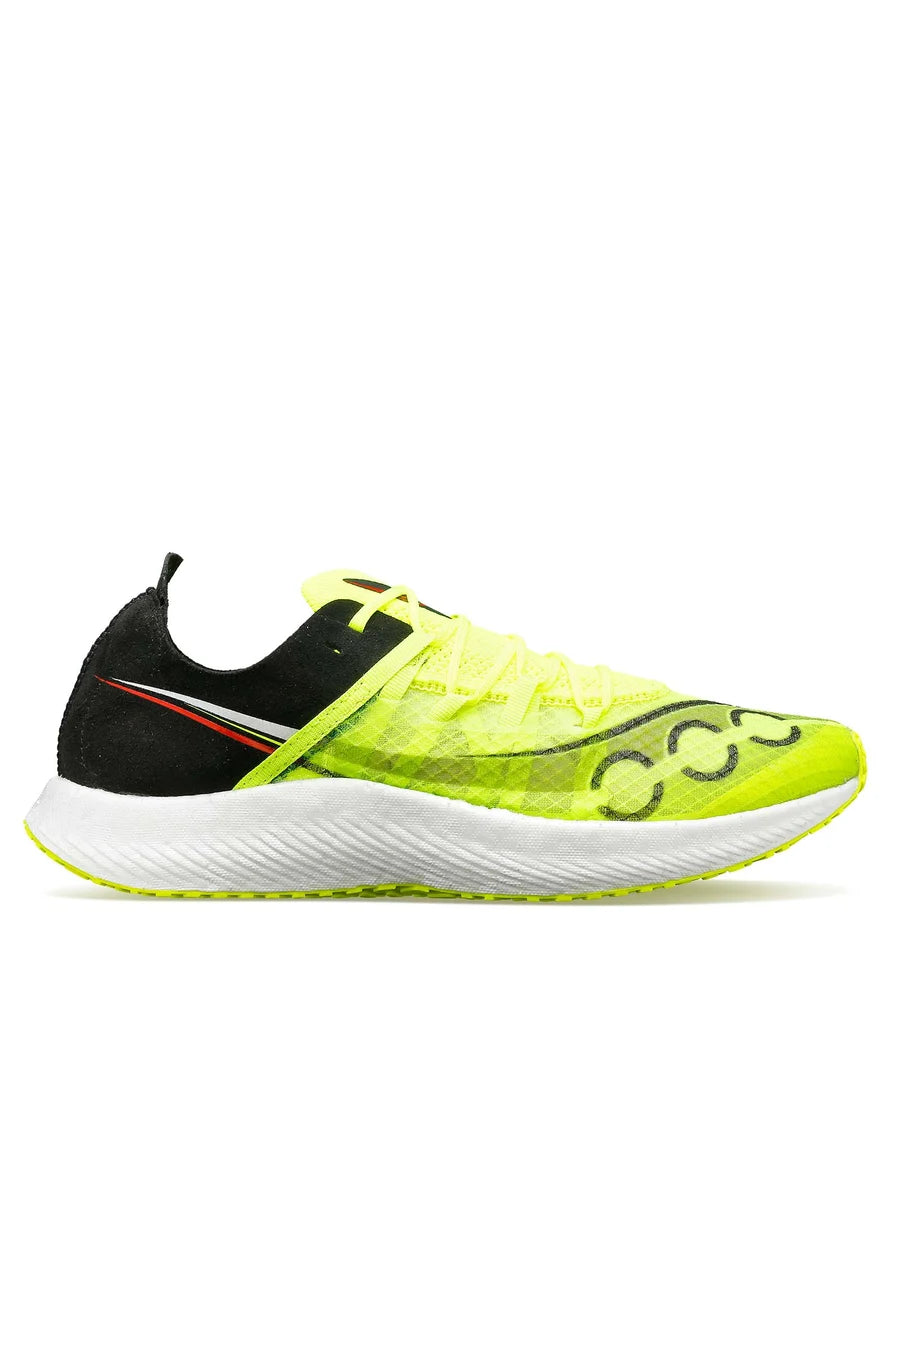 Saucony Sinister - Womens